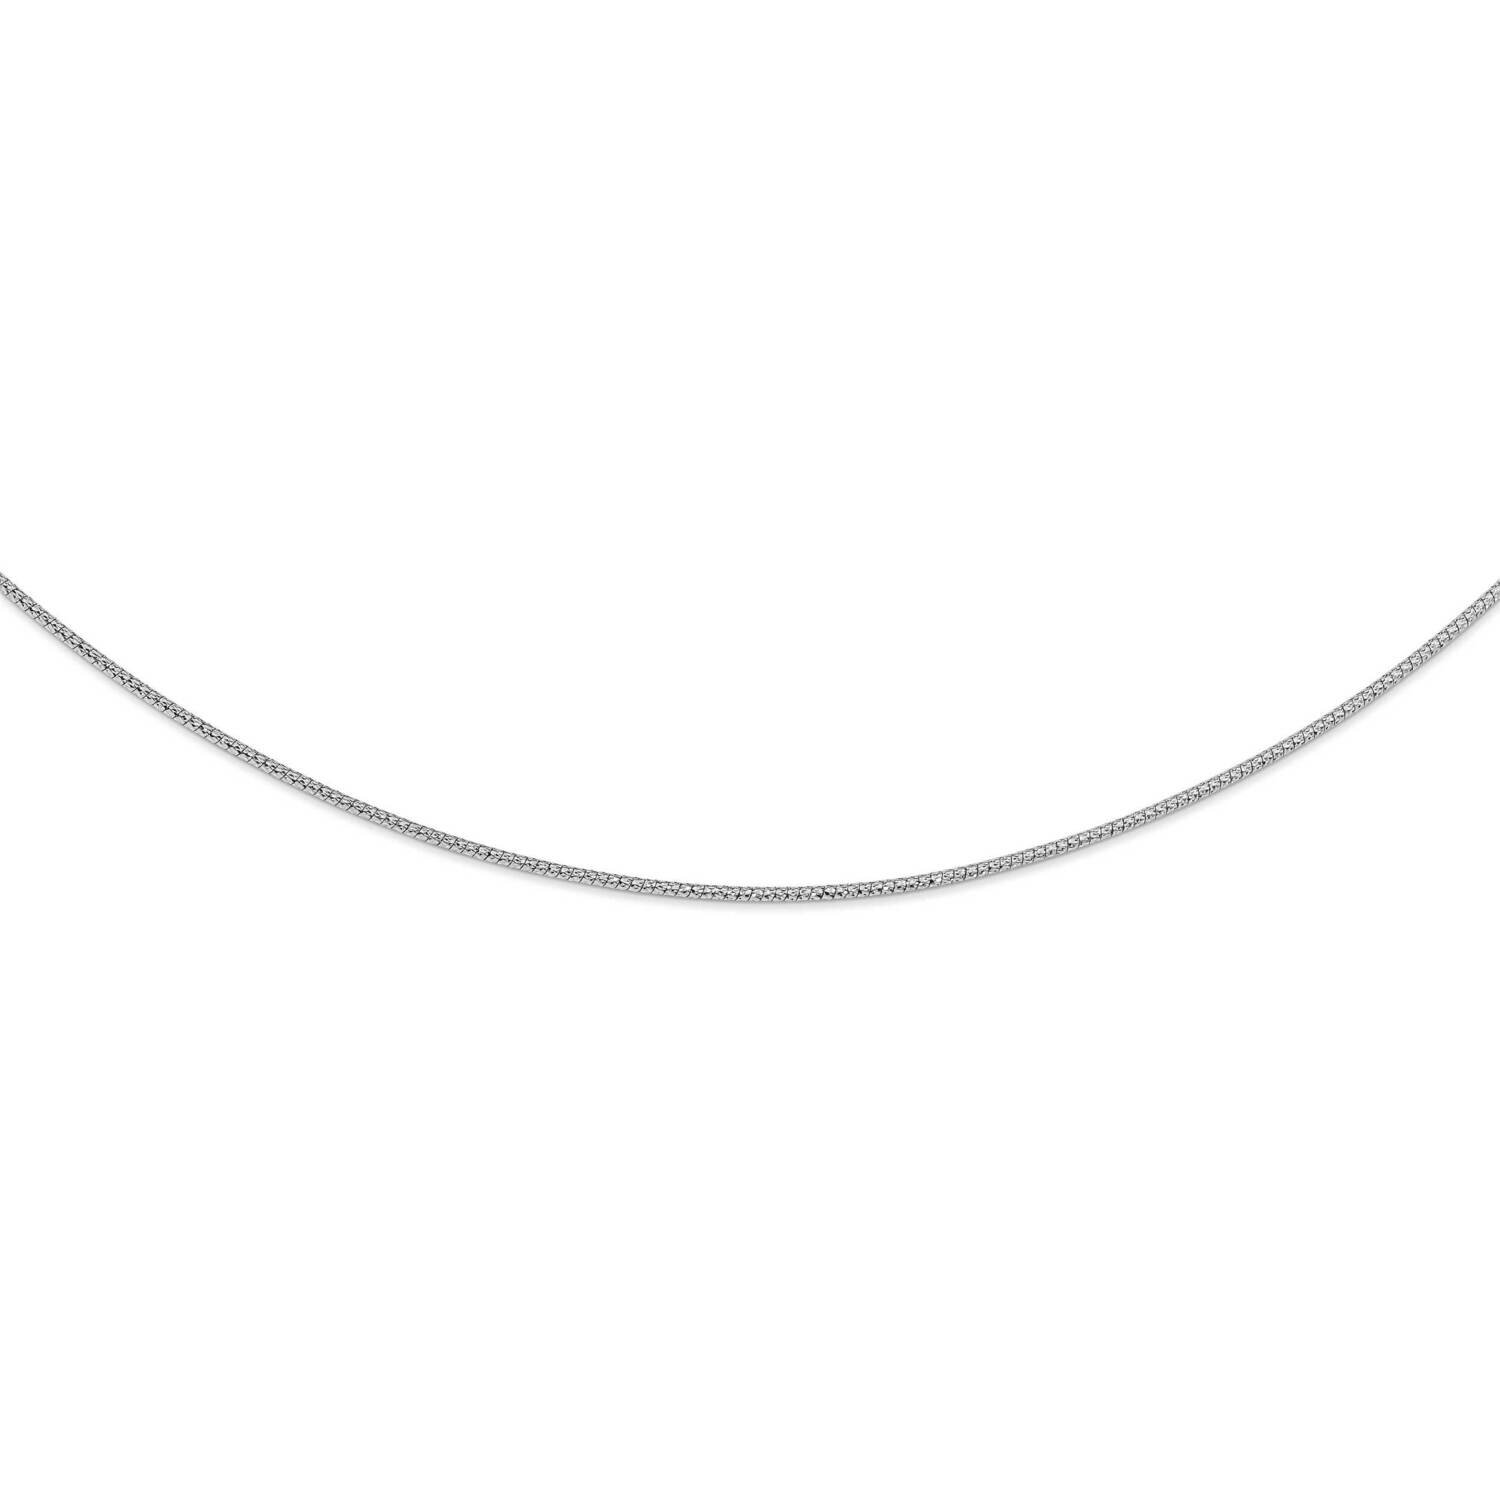 1.5mm Diamond-Cut Neckwire Necklace 14k White Gold HB-1331-16